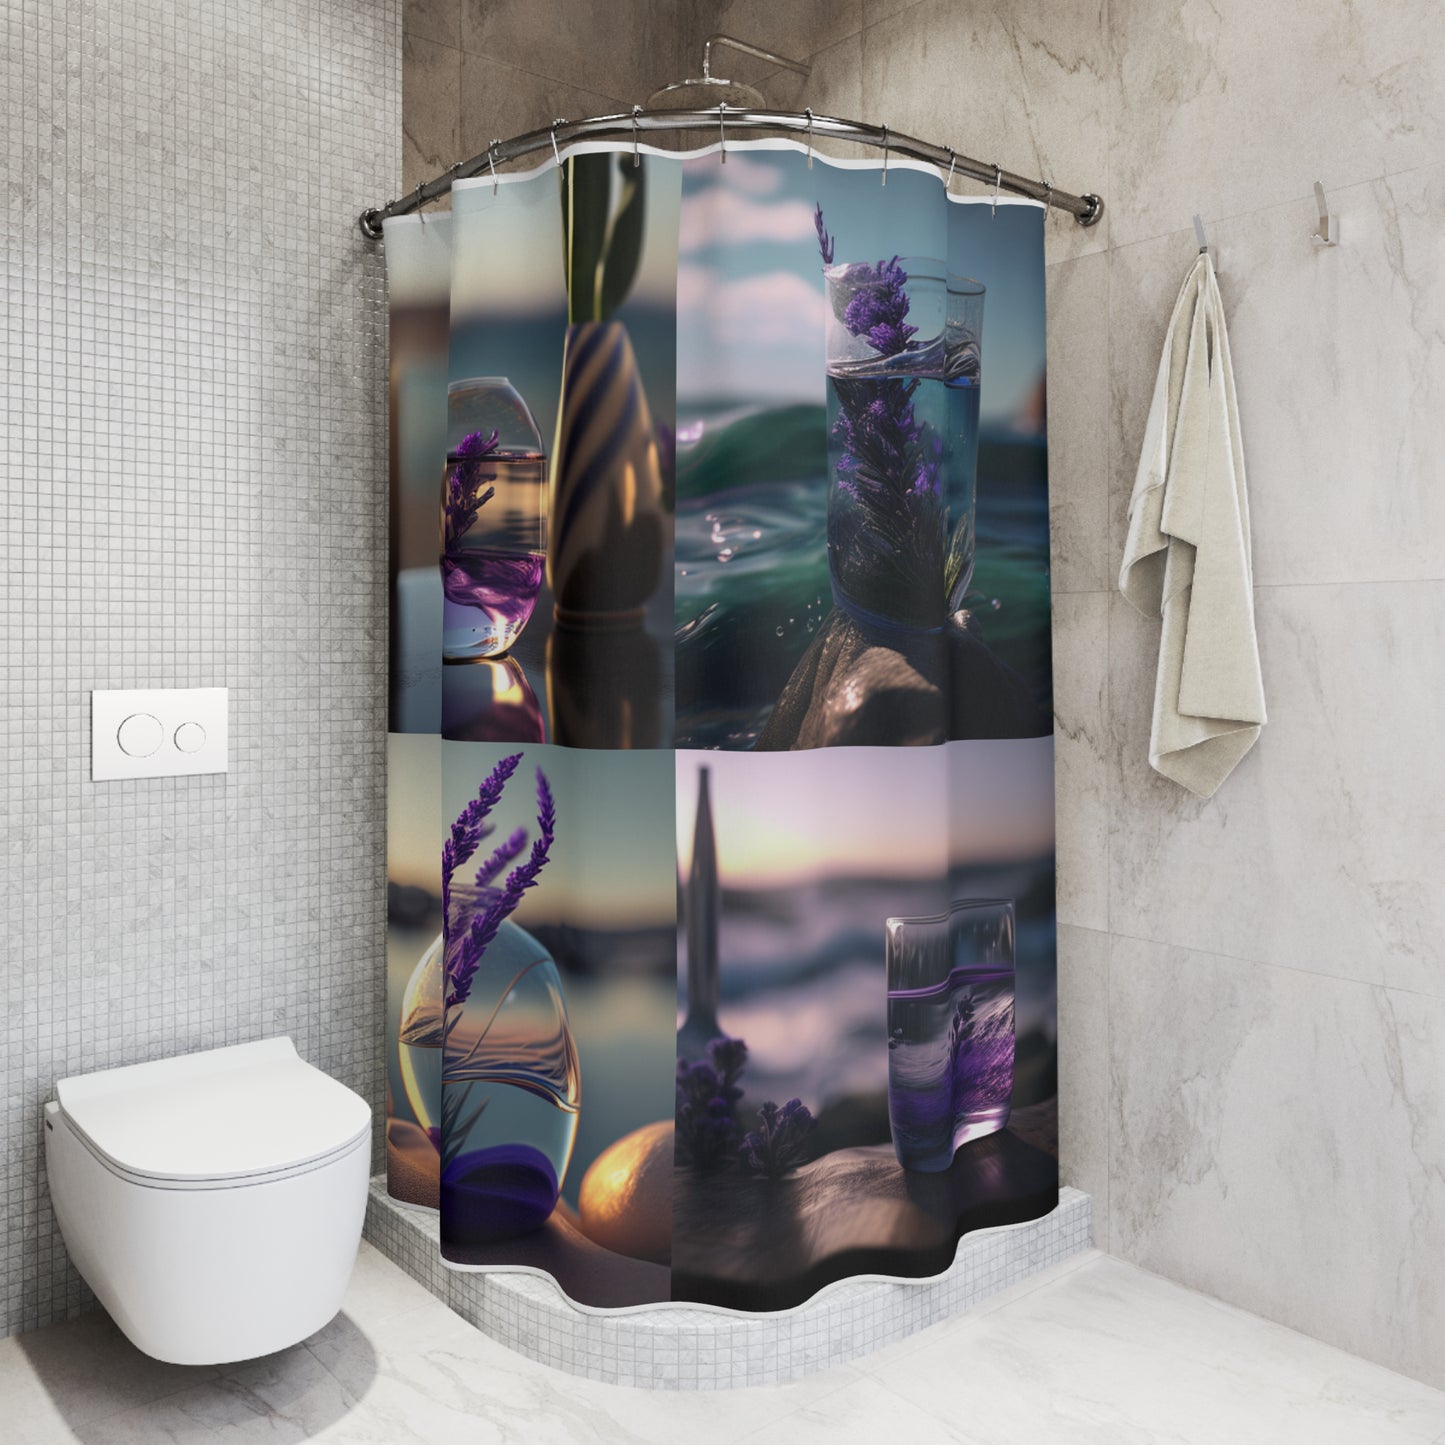 Polyester Shower Curtain Lavender in a vase 5